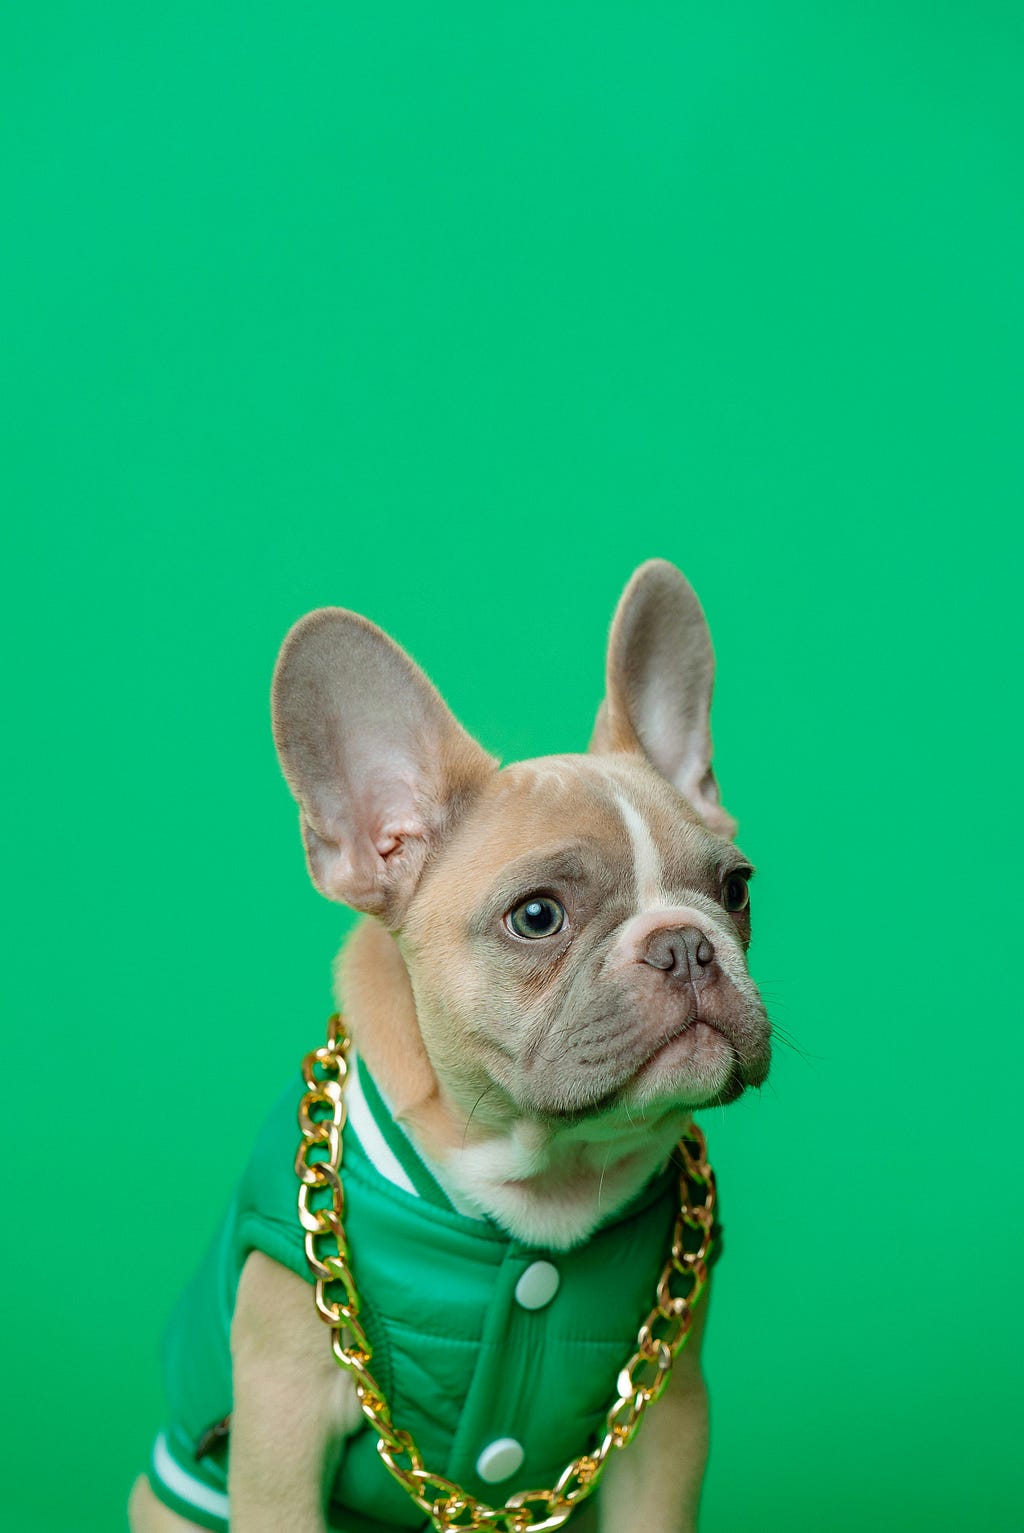 Small bulldog with big ears in green vest with absurdly thick gold chain draped around neck.